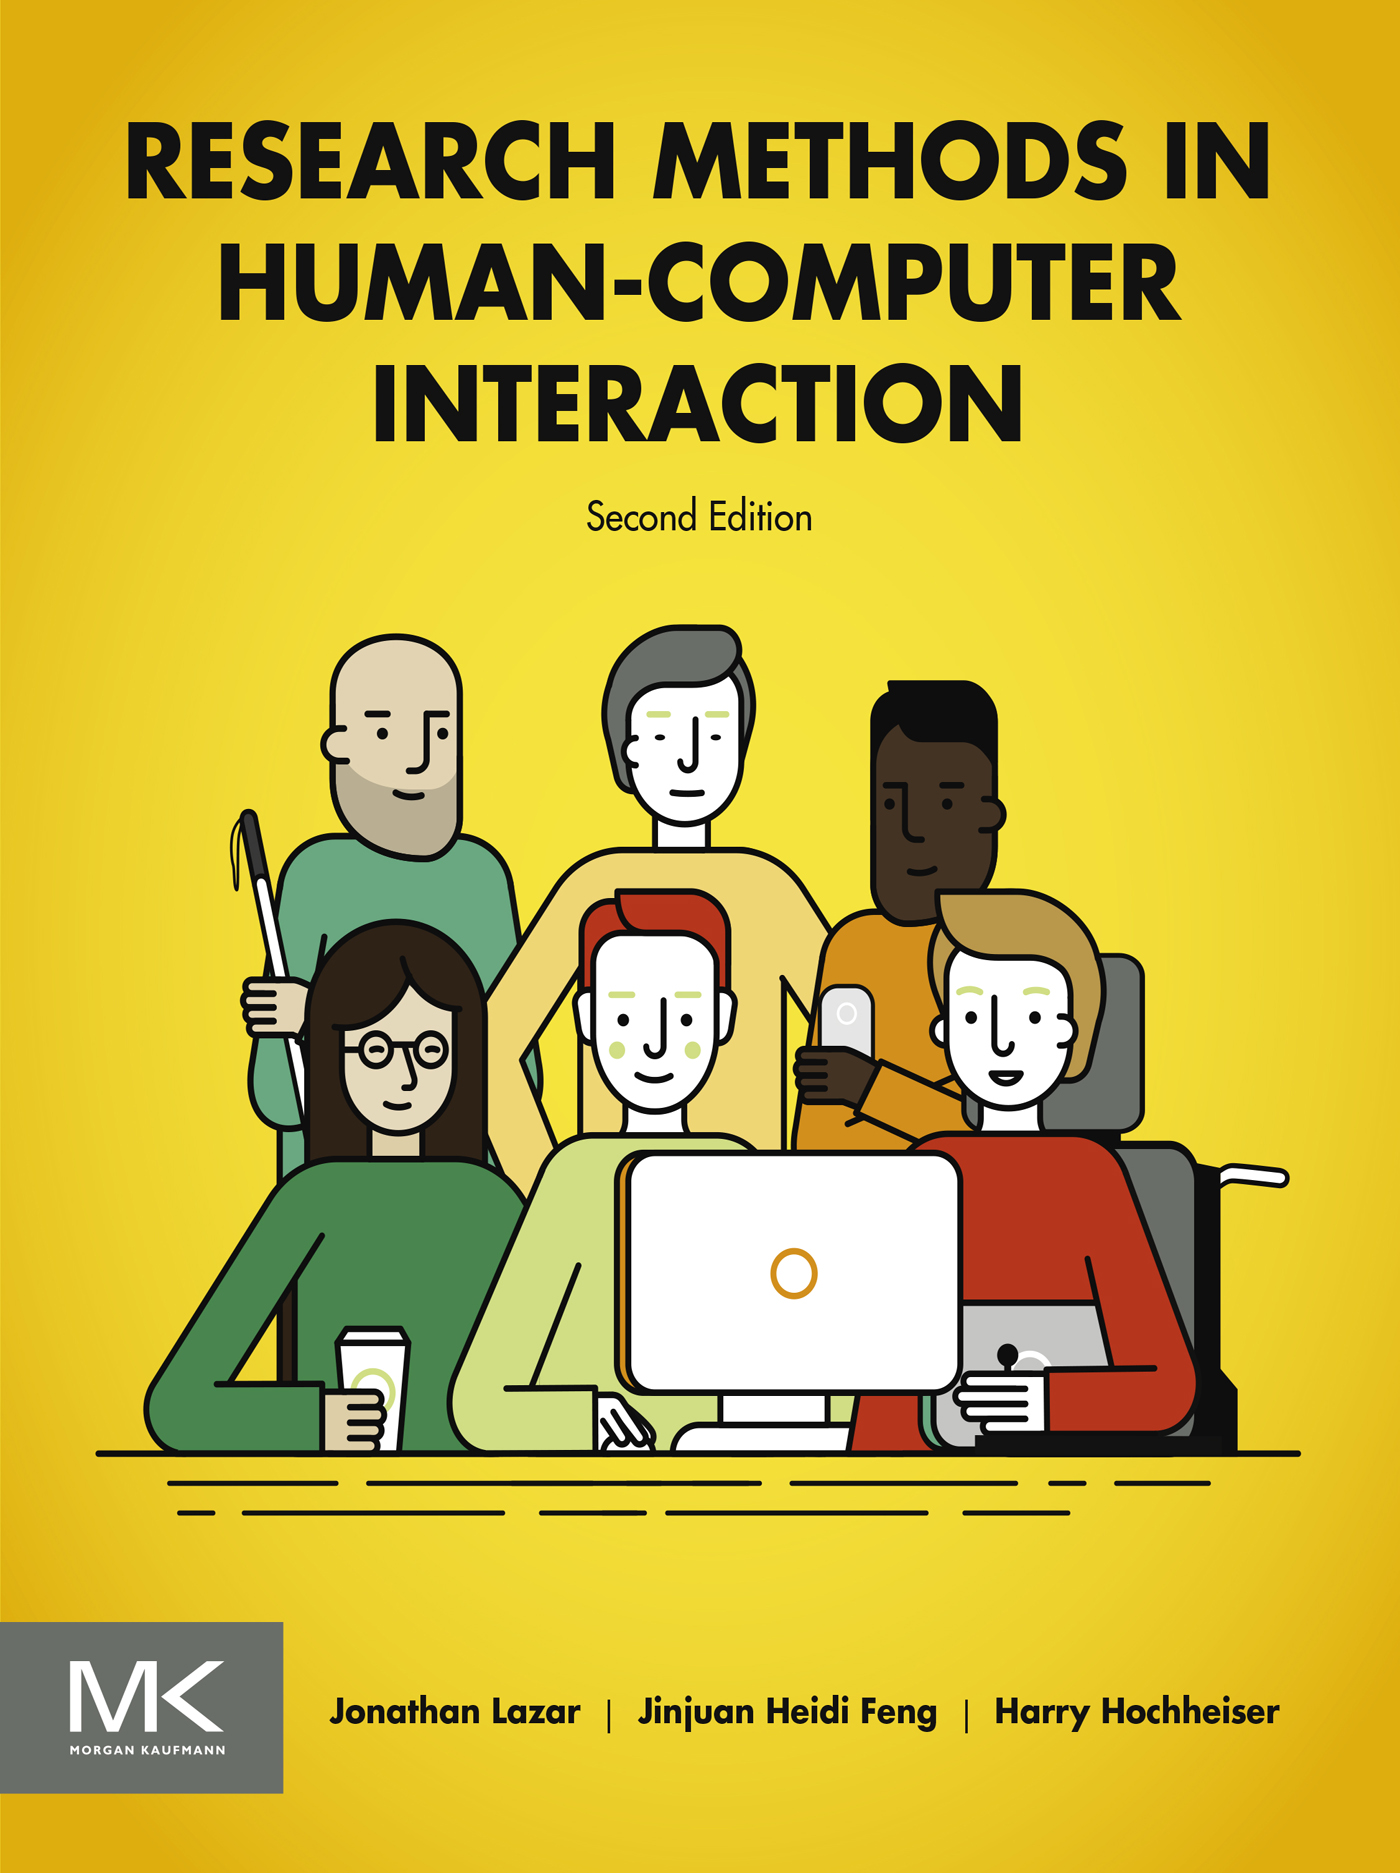 Front Cover for Research Methods in Human-Computer Interaction, second edition.  Authors, Jonathan Lazar, Jinjuan Feng, Harry Hochheiser.  The cover image depicts a variety of individuals of different backgrounds, some with disabilities, in front of a computer screen. Morgan Kaufmann logo.